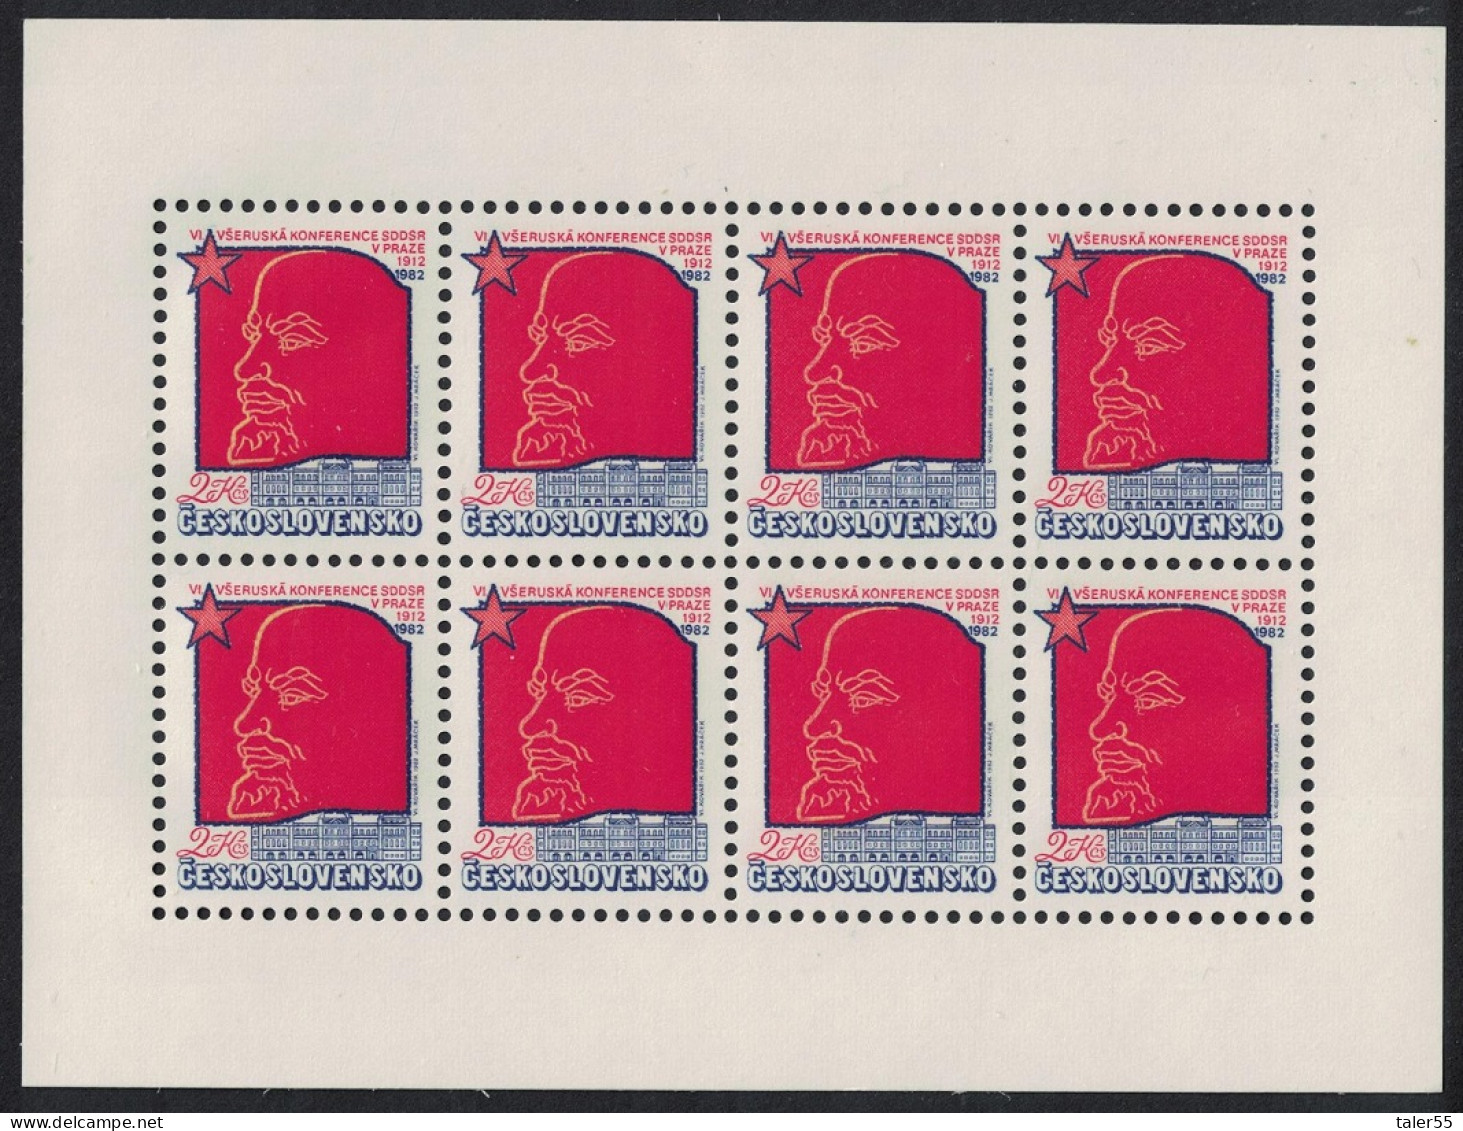 Czechoslovakia Lenin Sixth Russian Workers' Party Congress Prague Sheetlet 1982 MNH SG#2607 - Unused Stamps